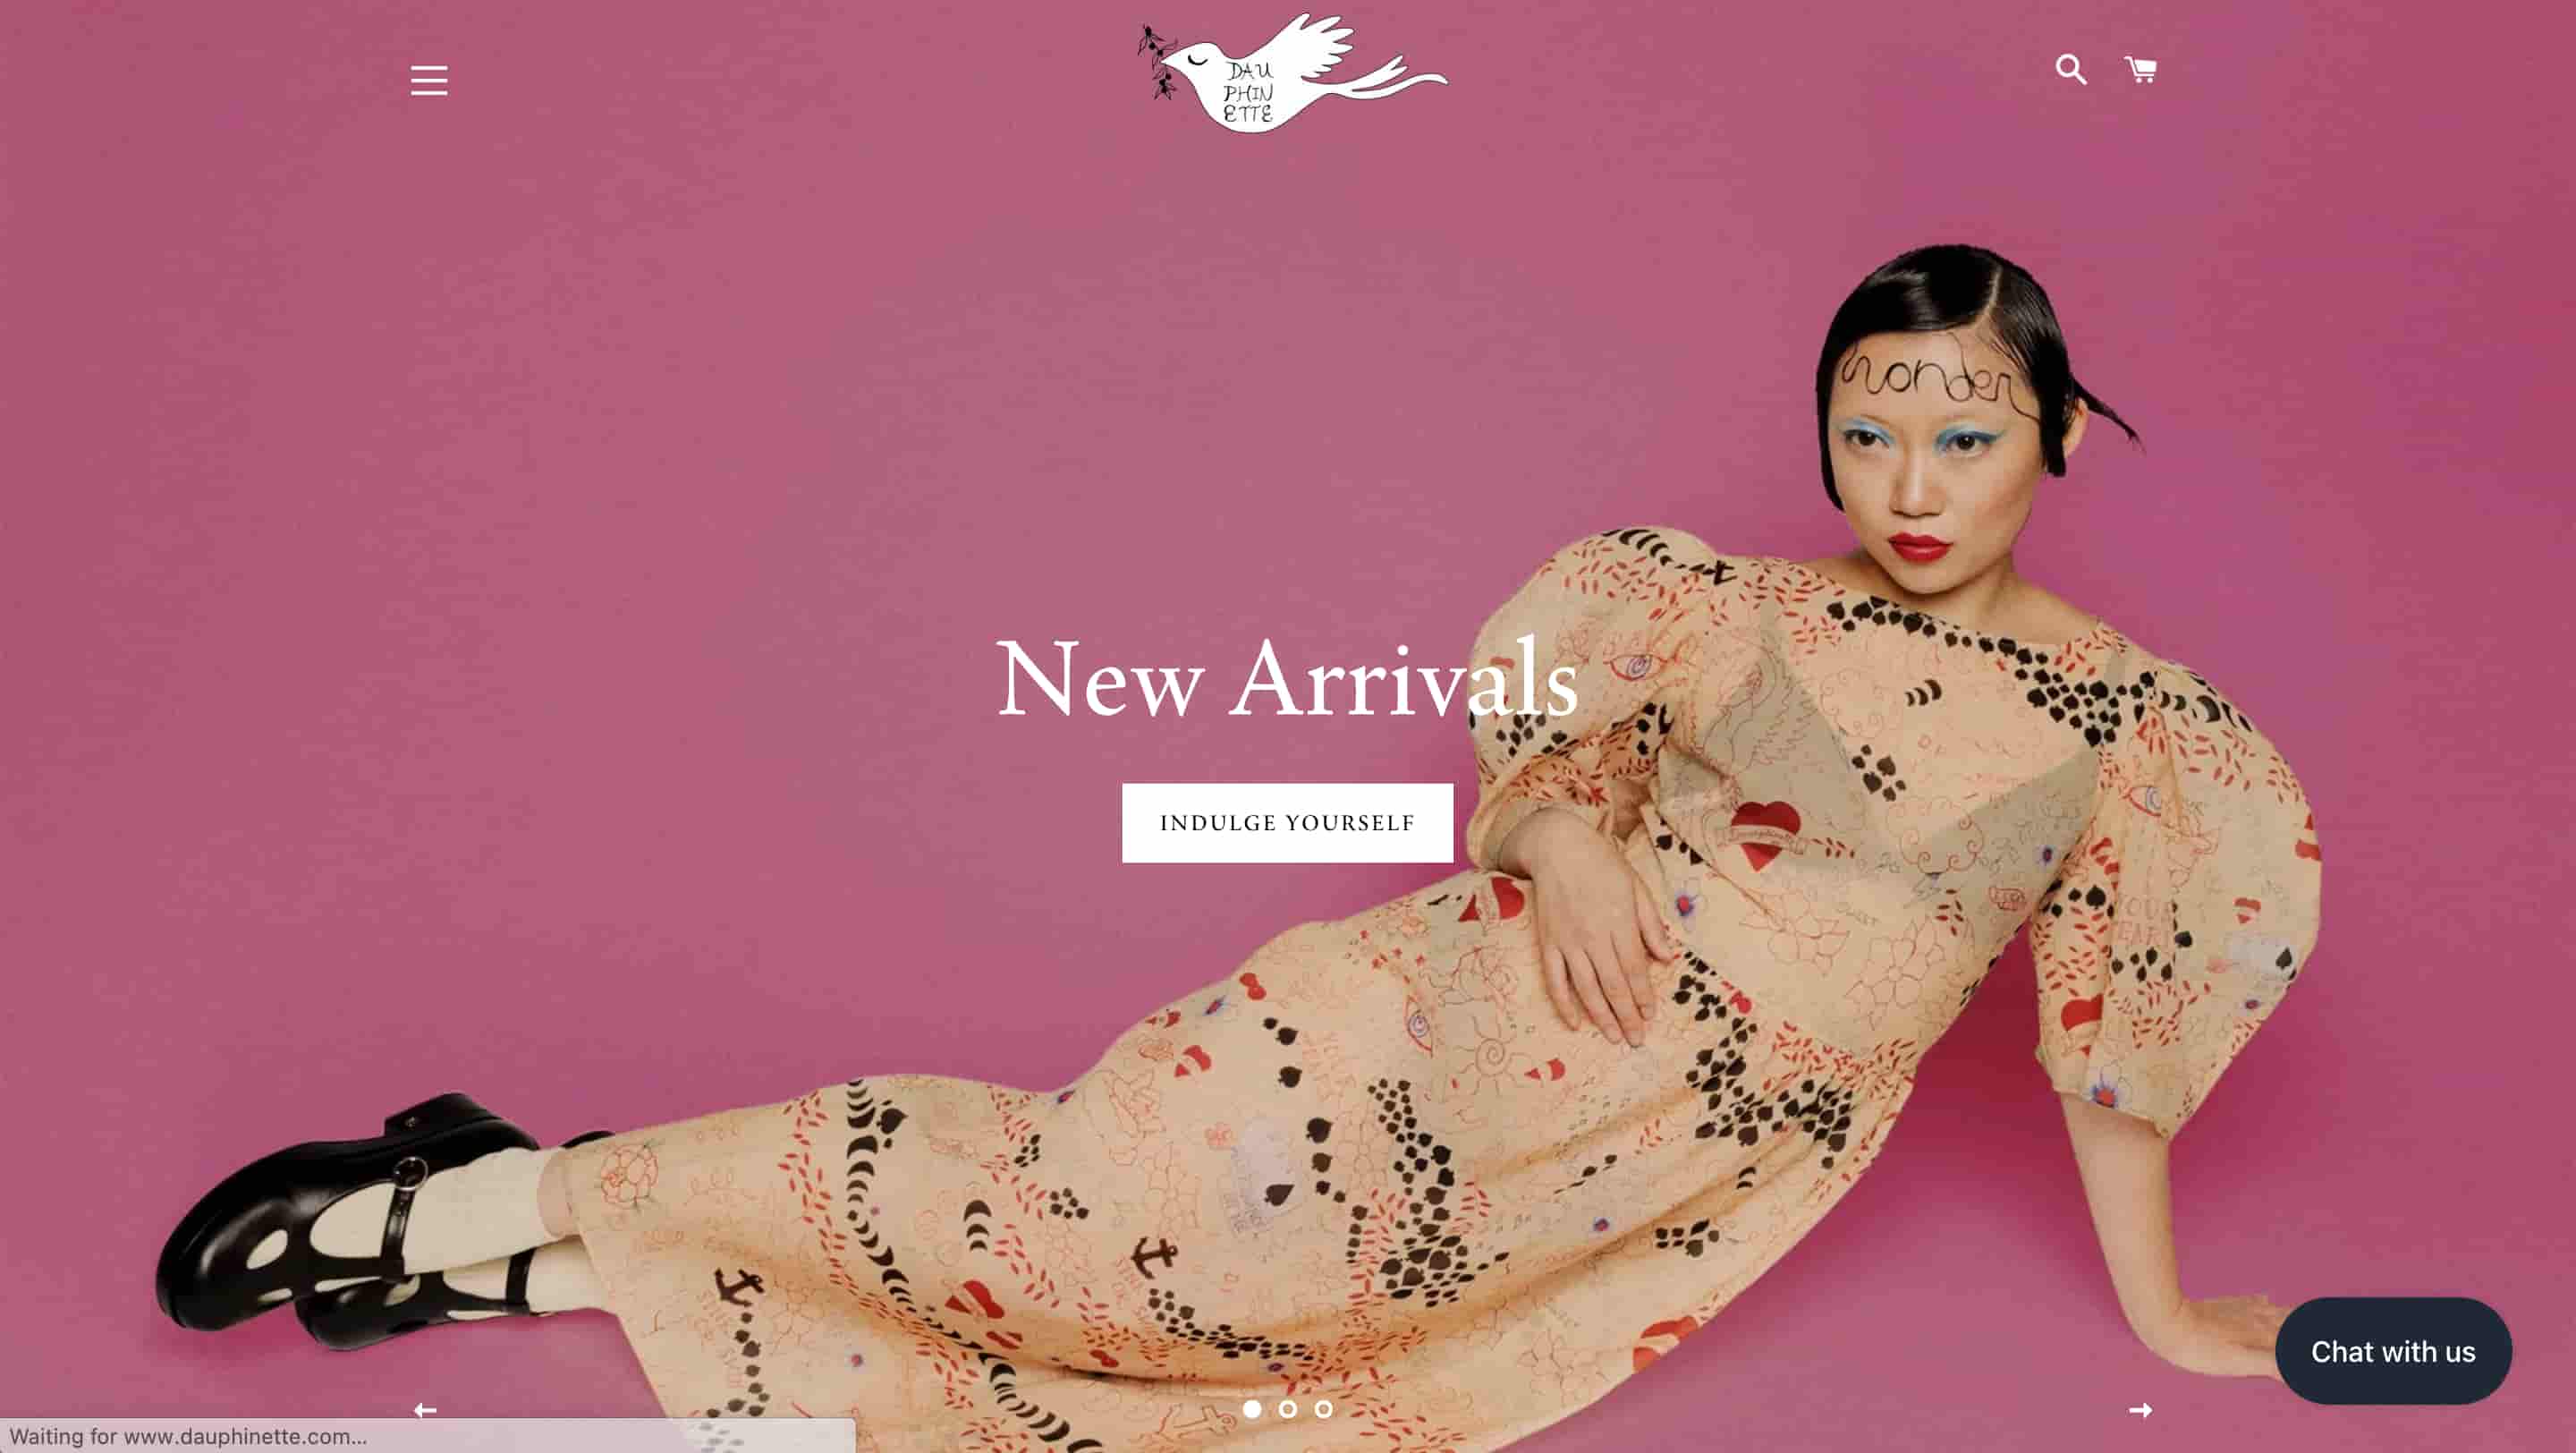 fashion website design dauphinette shows person wearing the brand's clothing laying on a pink background 